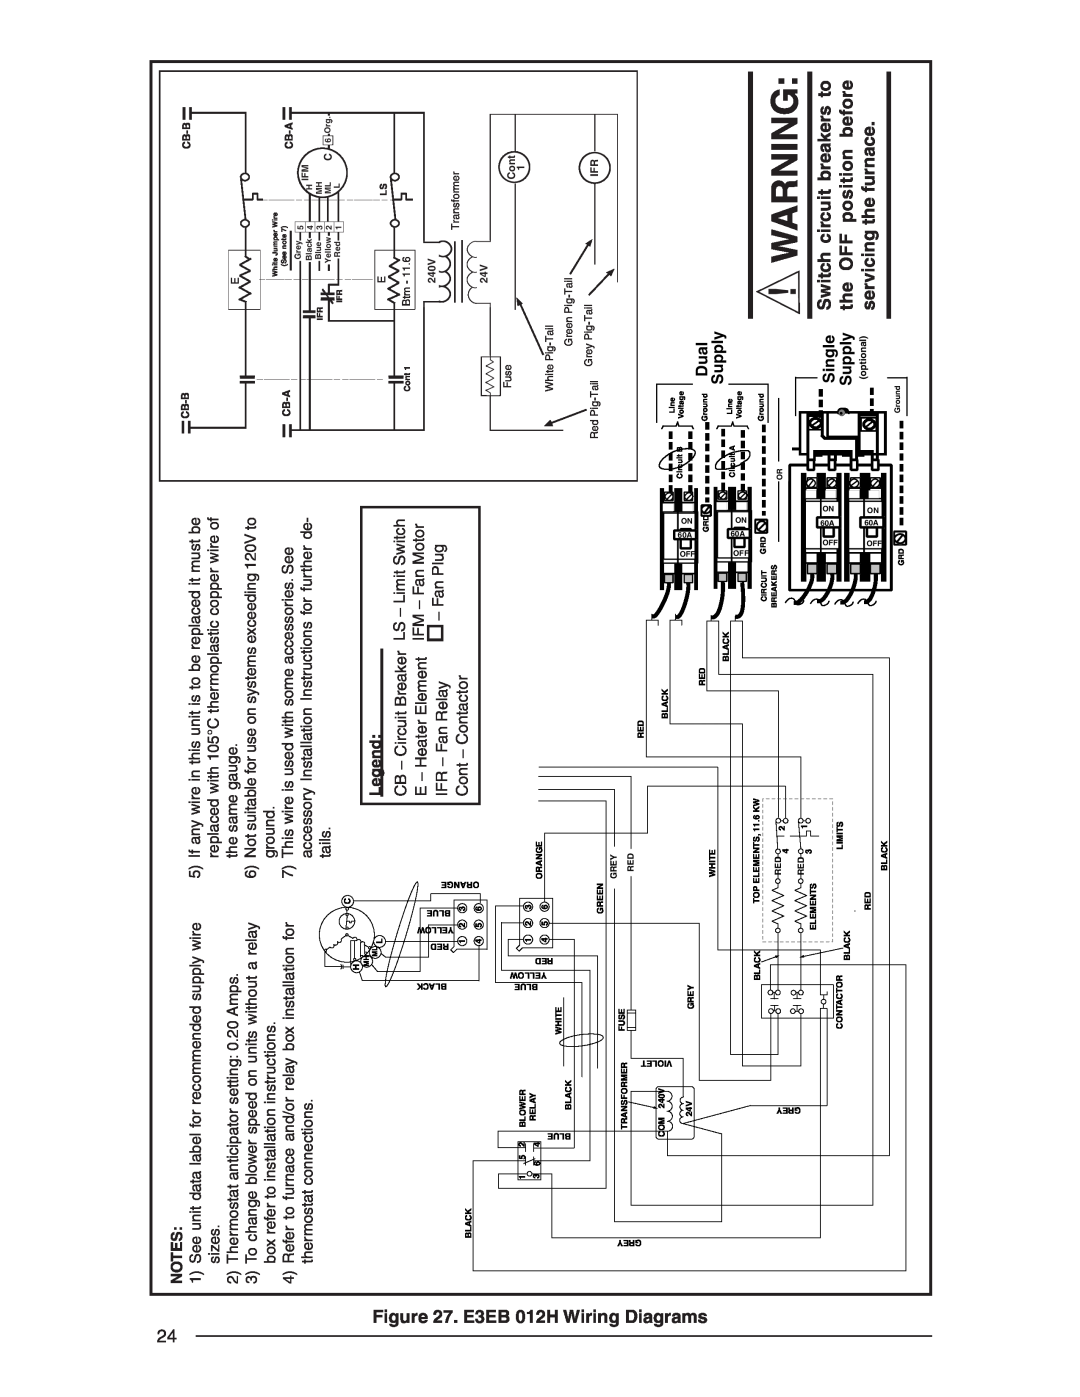 Nordyne E3EB 012H Wiring Diagrams, position, before, servicing the furnace, Switch circuit breakers to, Dual, Supply 